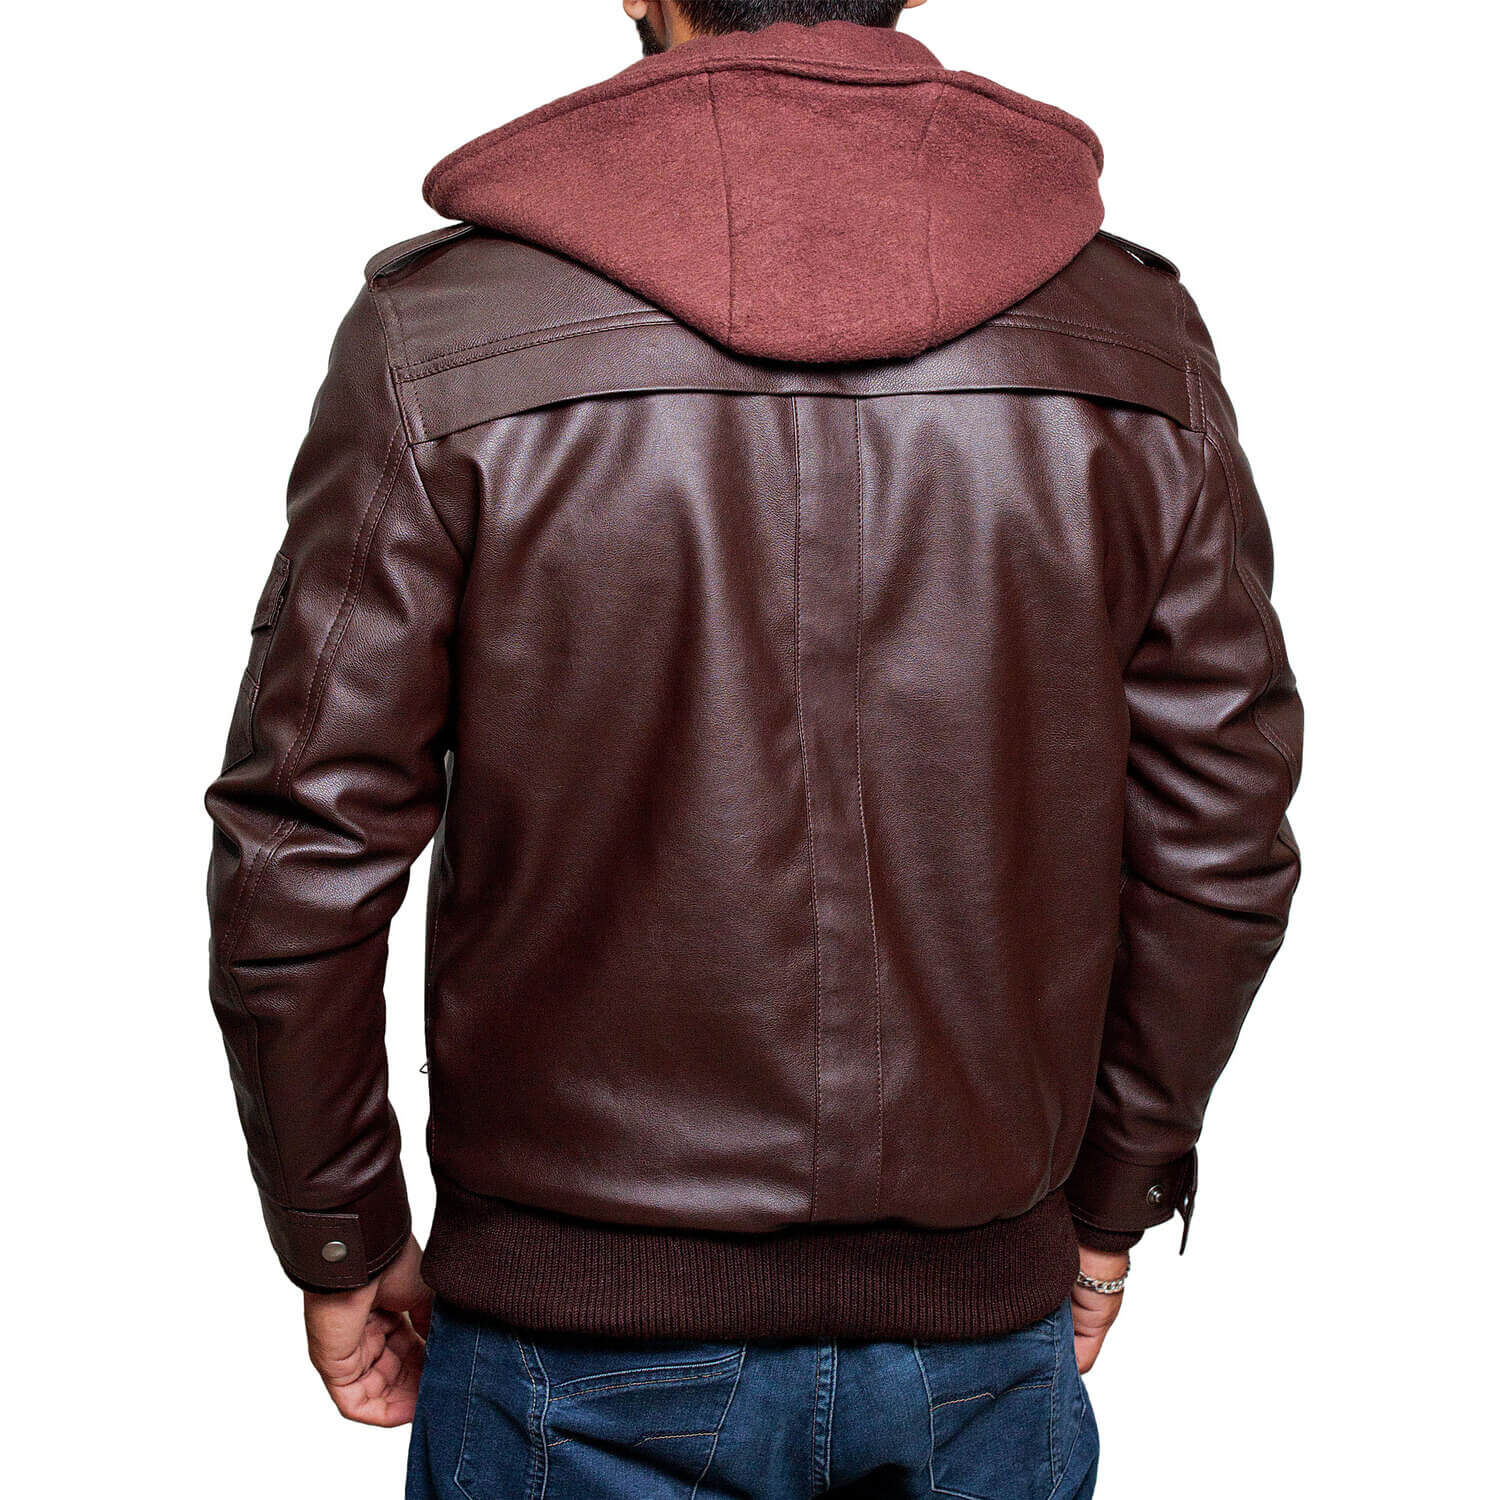 XJ Mens Brown Leather Jacket with Hood | XtremeJackets